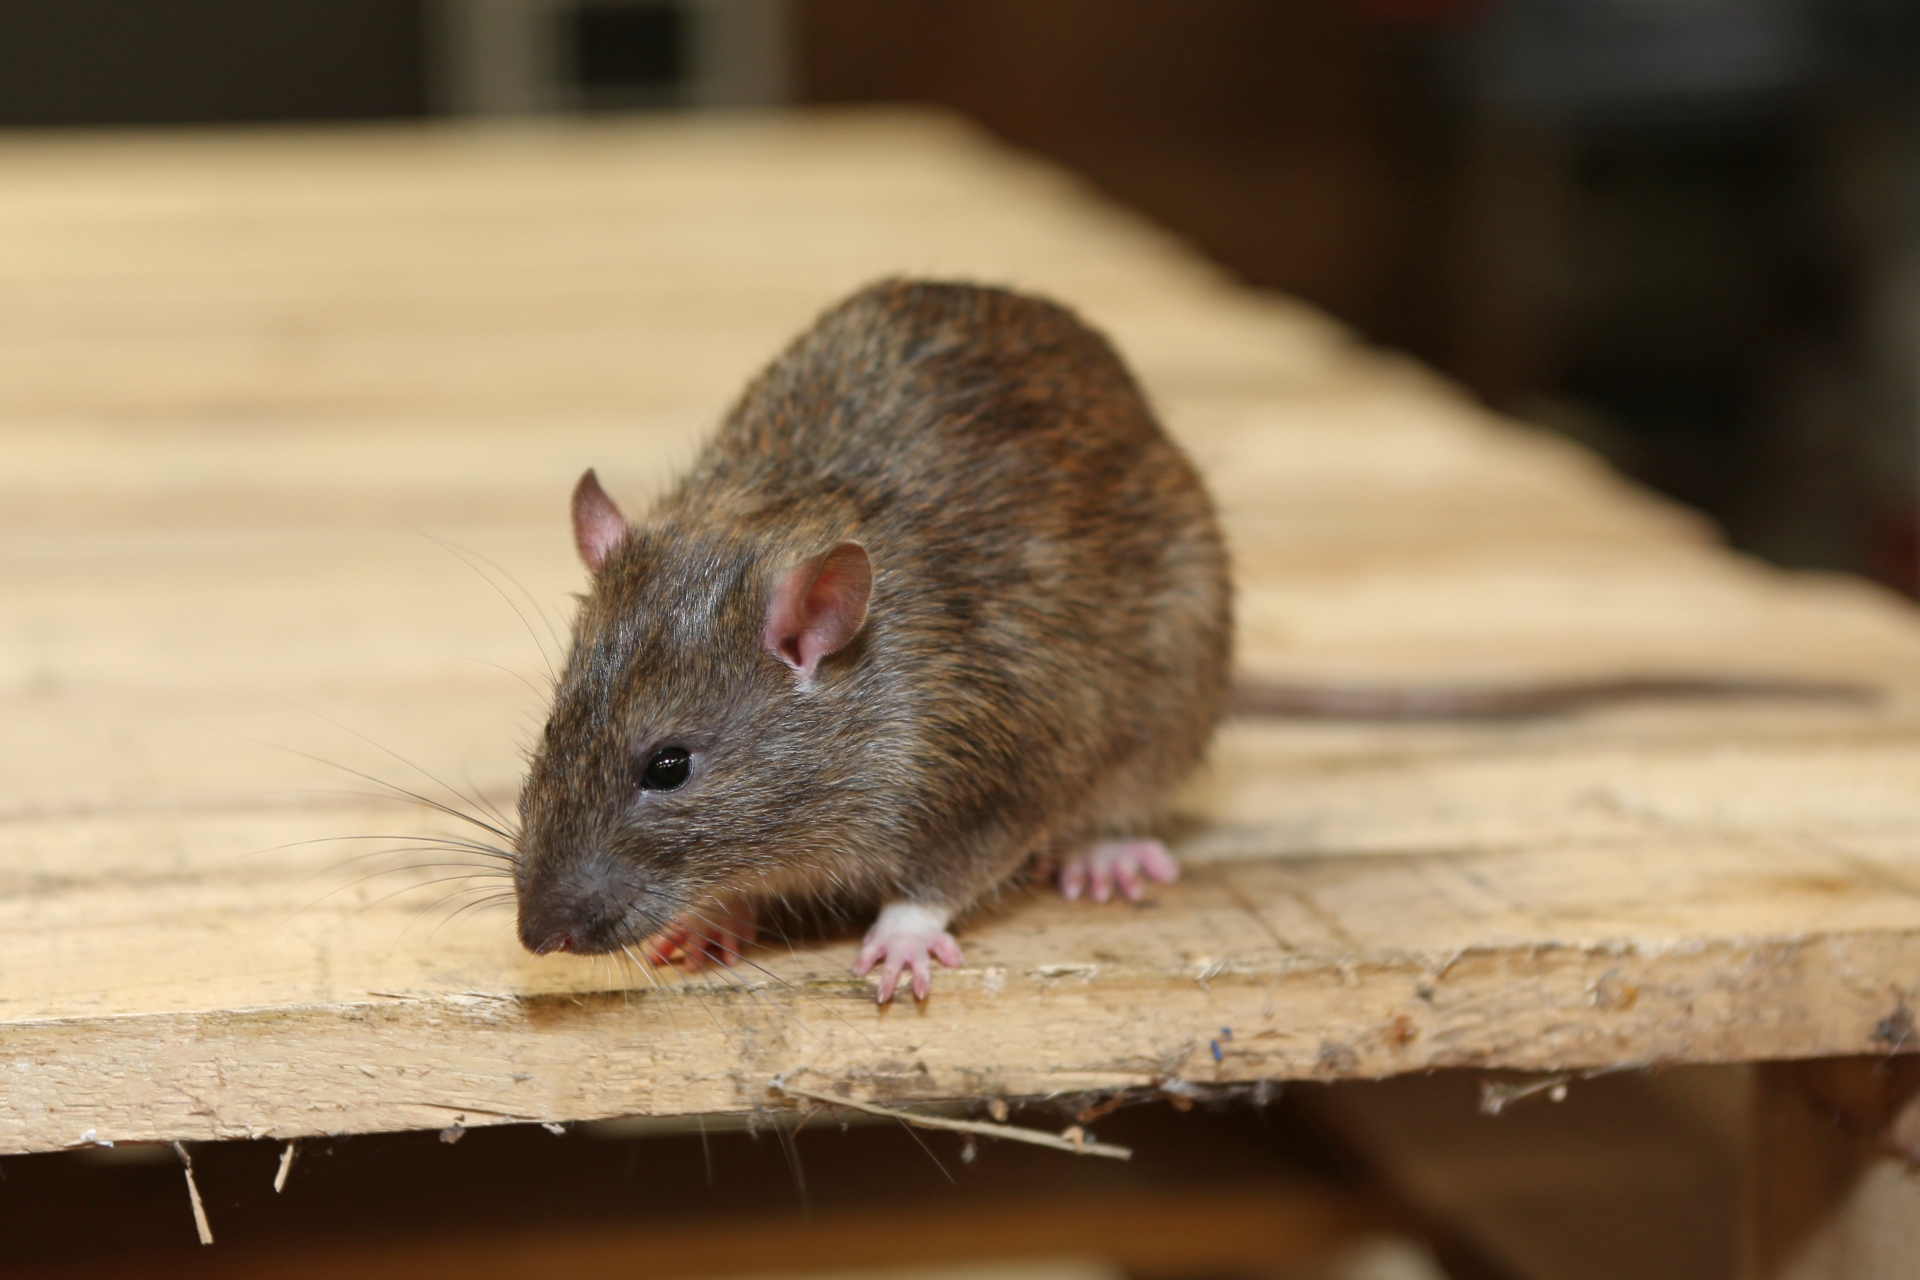 Rat extermination, Pest Control in North Watford, WD24. Call Now 020 8166 9746